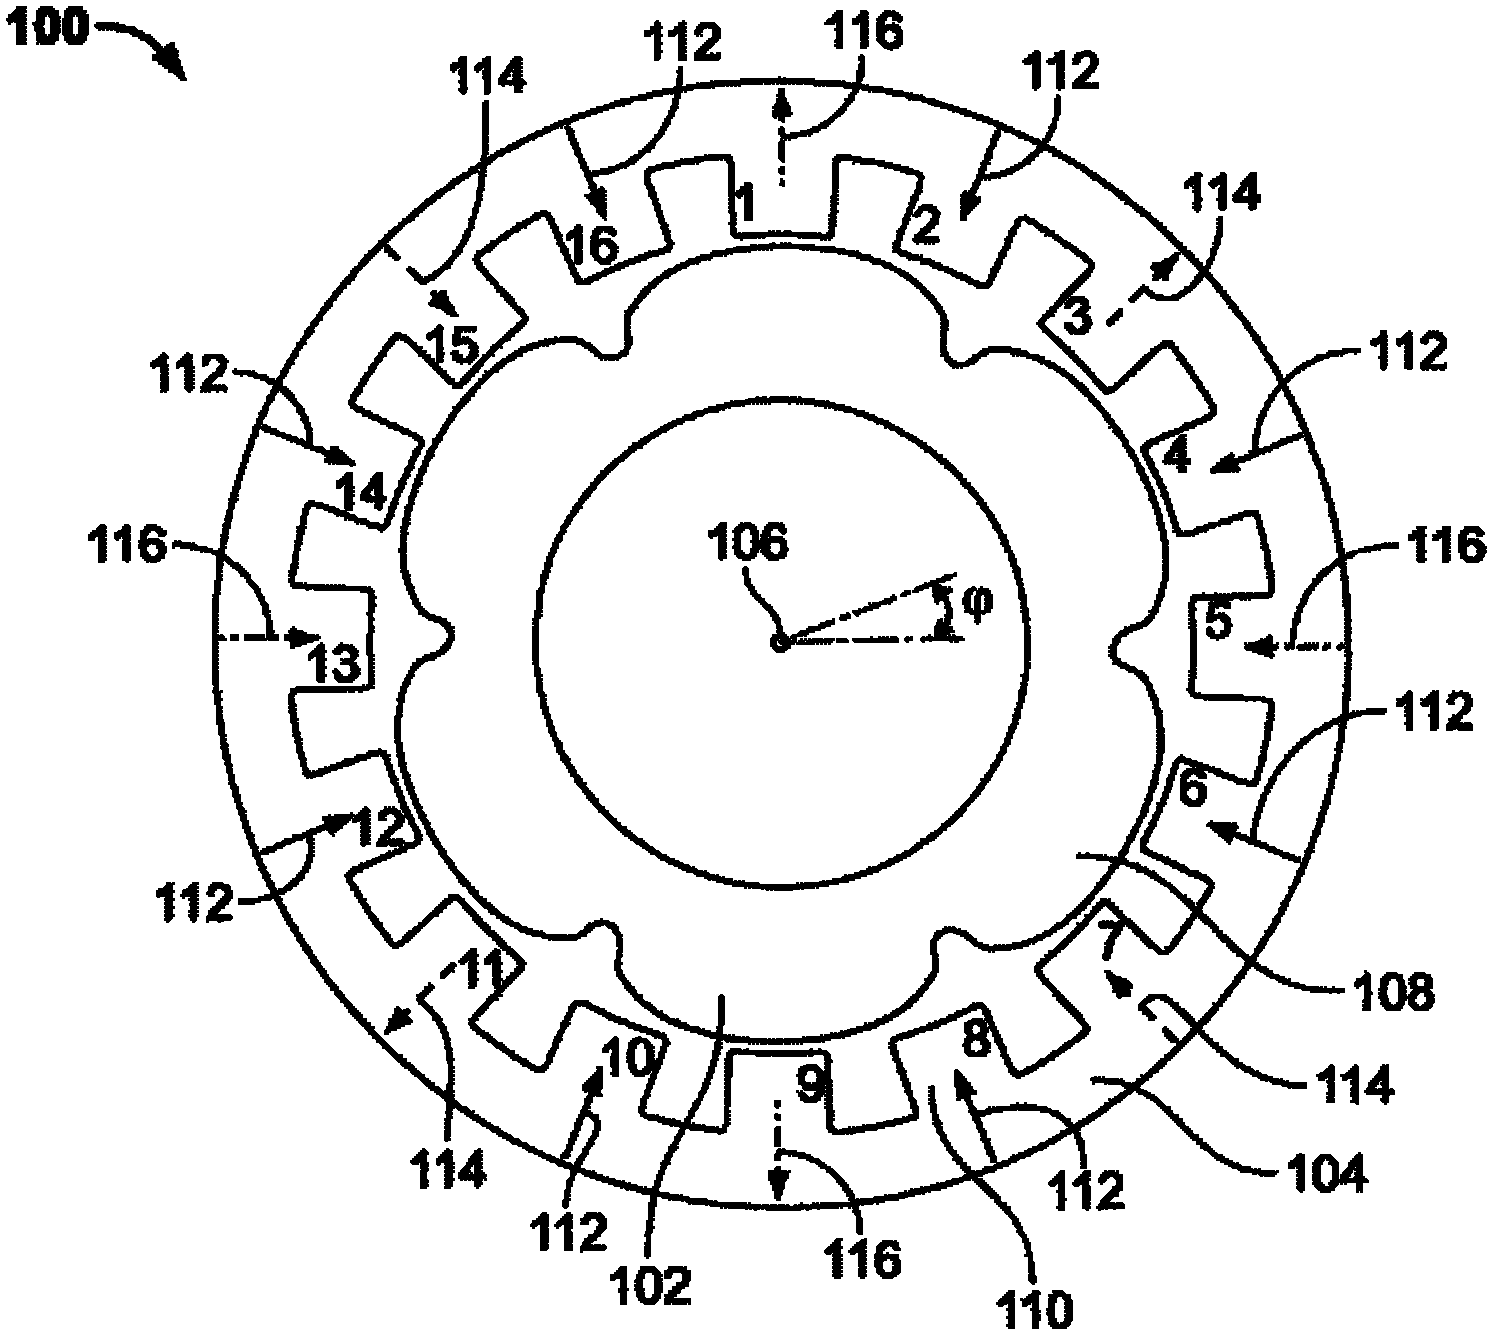 Magnetoelectronic angle sensor, in particular a reluctance resolver